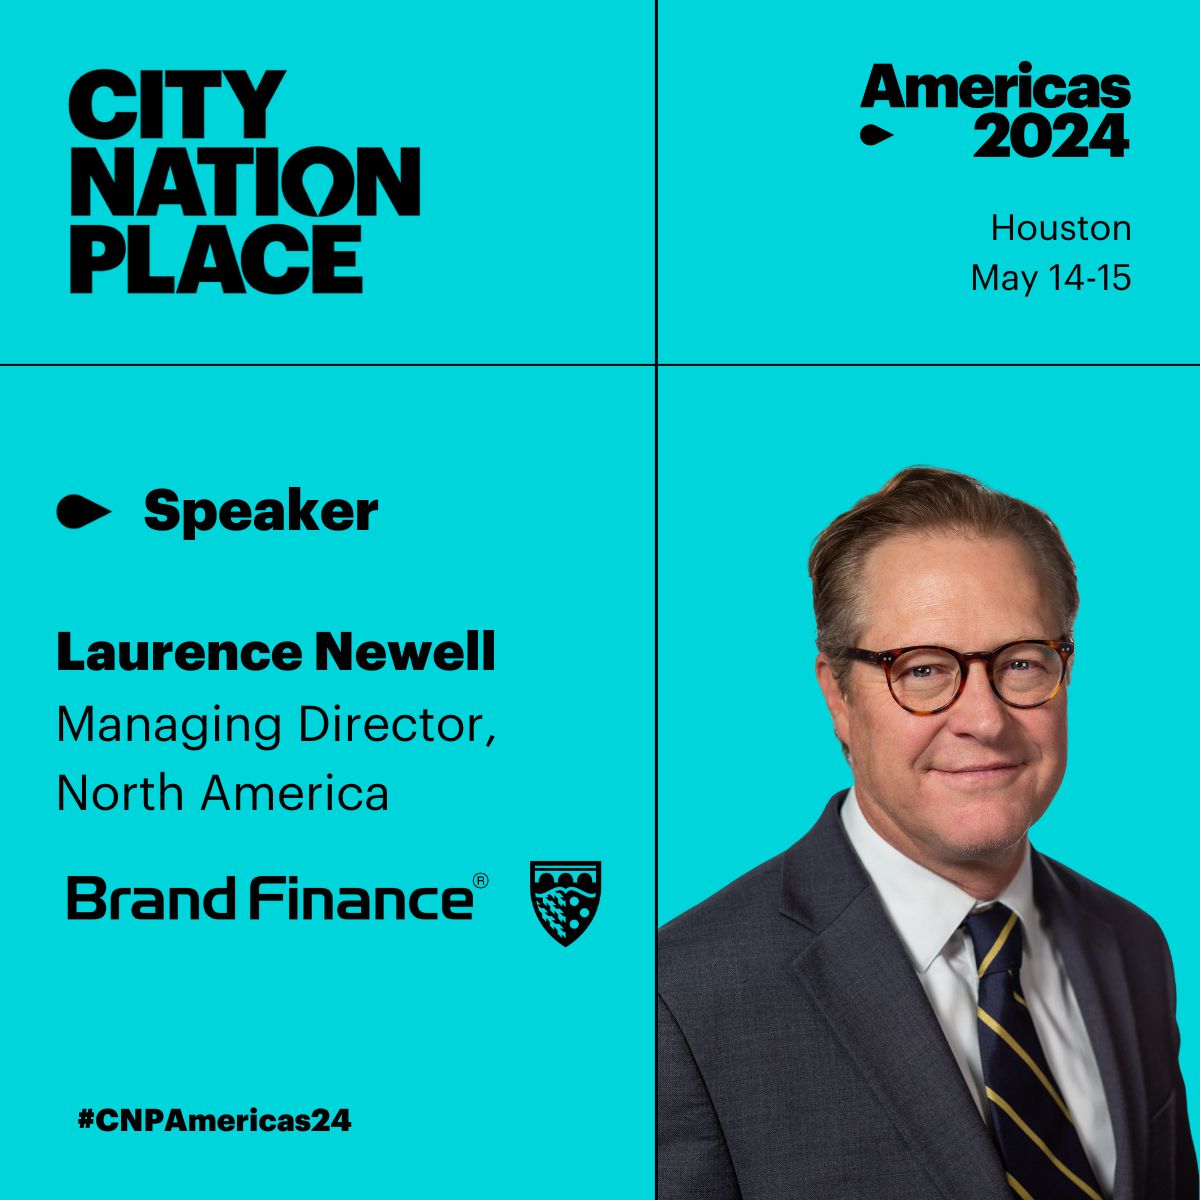 Unlocking the power of #placebranding - Brand Finance is once again partnering with @citynationplace for their Americas Conference in Houston on 14th-15th May! City Nation Place breaks down silos, fostering dialogue on how #cities can attract #talent, #tourism, and #investment…